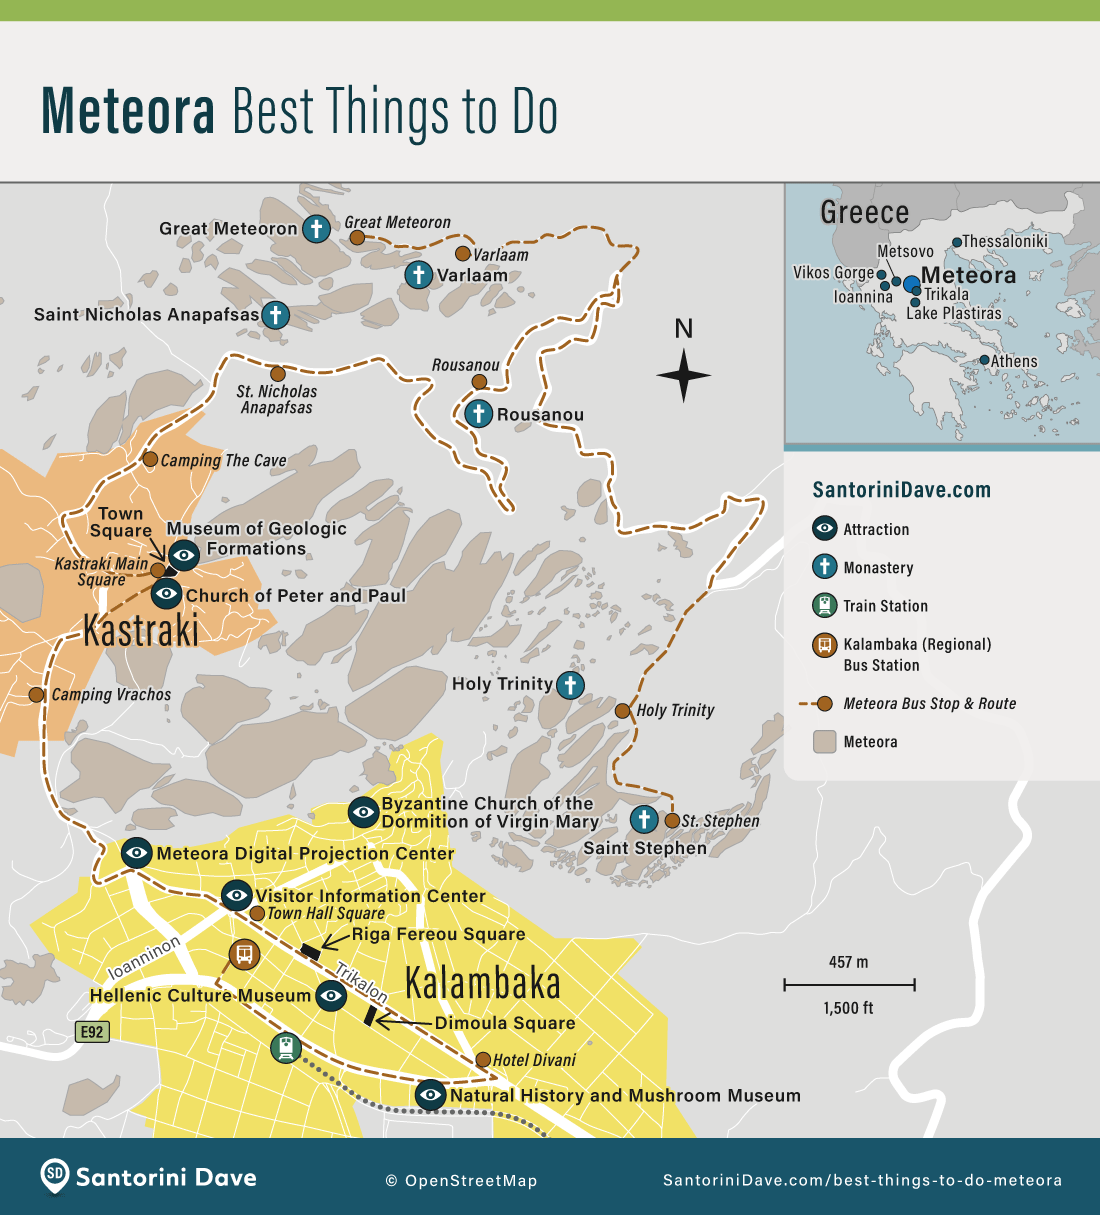 Map showing the locations of the 6 Meteora Monasteries, as well as other local museums and attractions, and the local bus route.